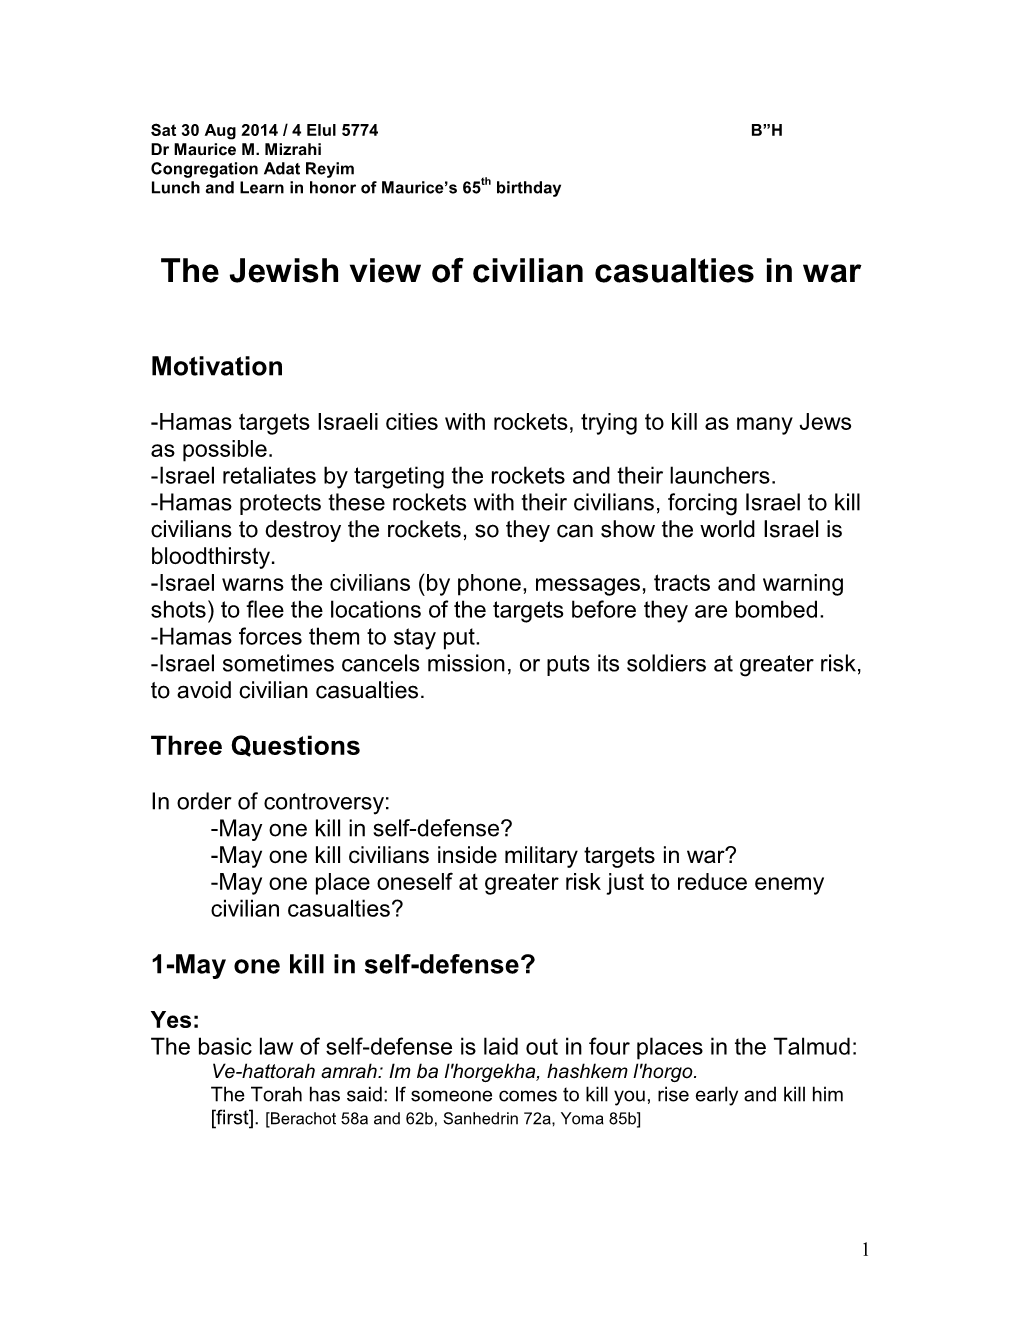 The Jewish View of Civilian Casualties in War Motivation